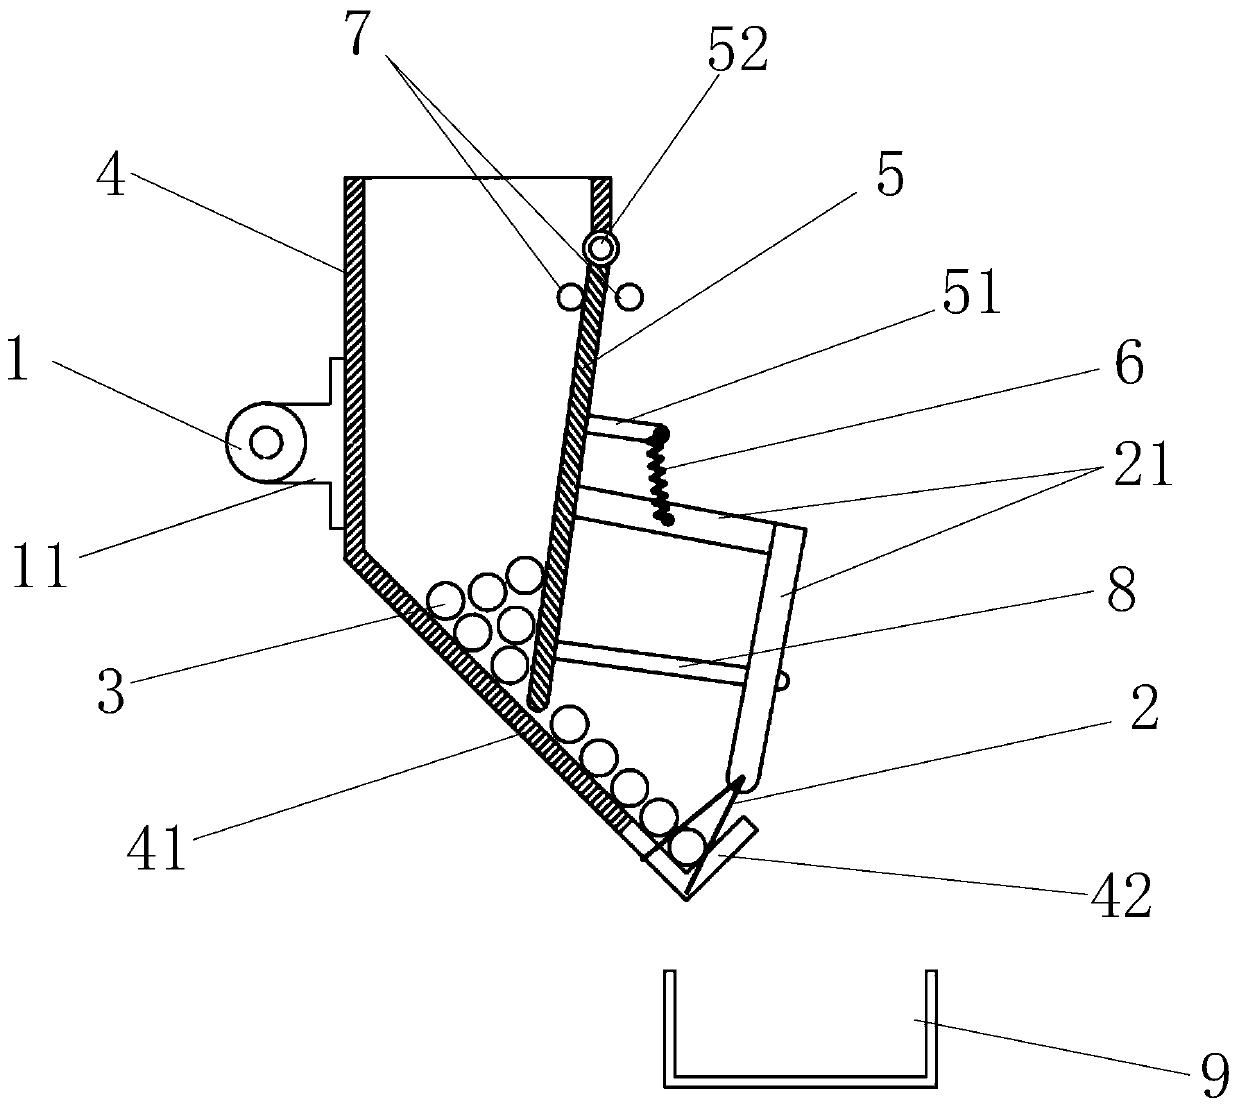 Stick-shaped object pick-and-place device